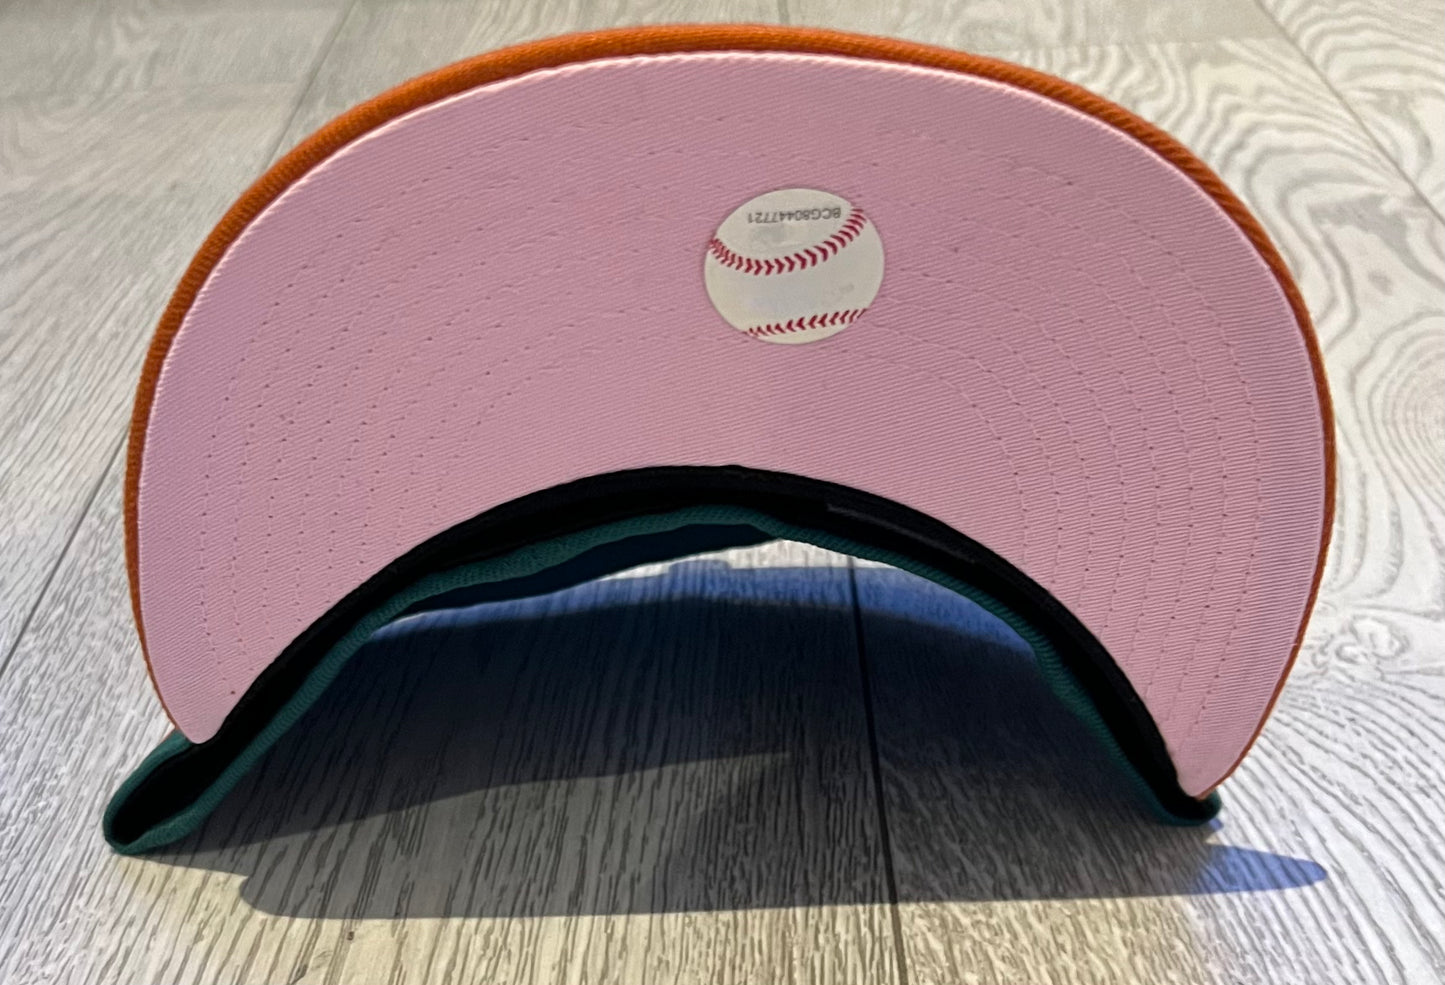 Hat Club Cactus Fruit Houston Astros Script 35 Great Years Two Tone (Pink UV)